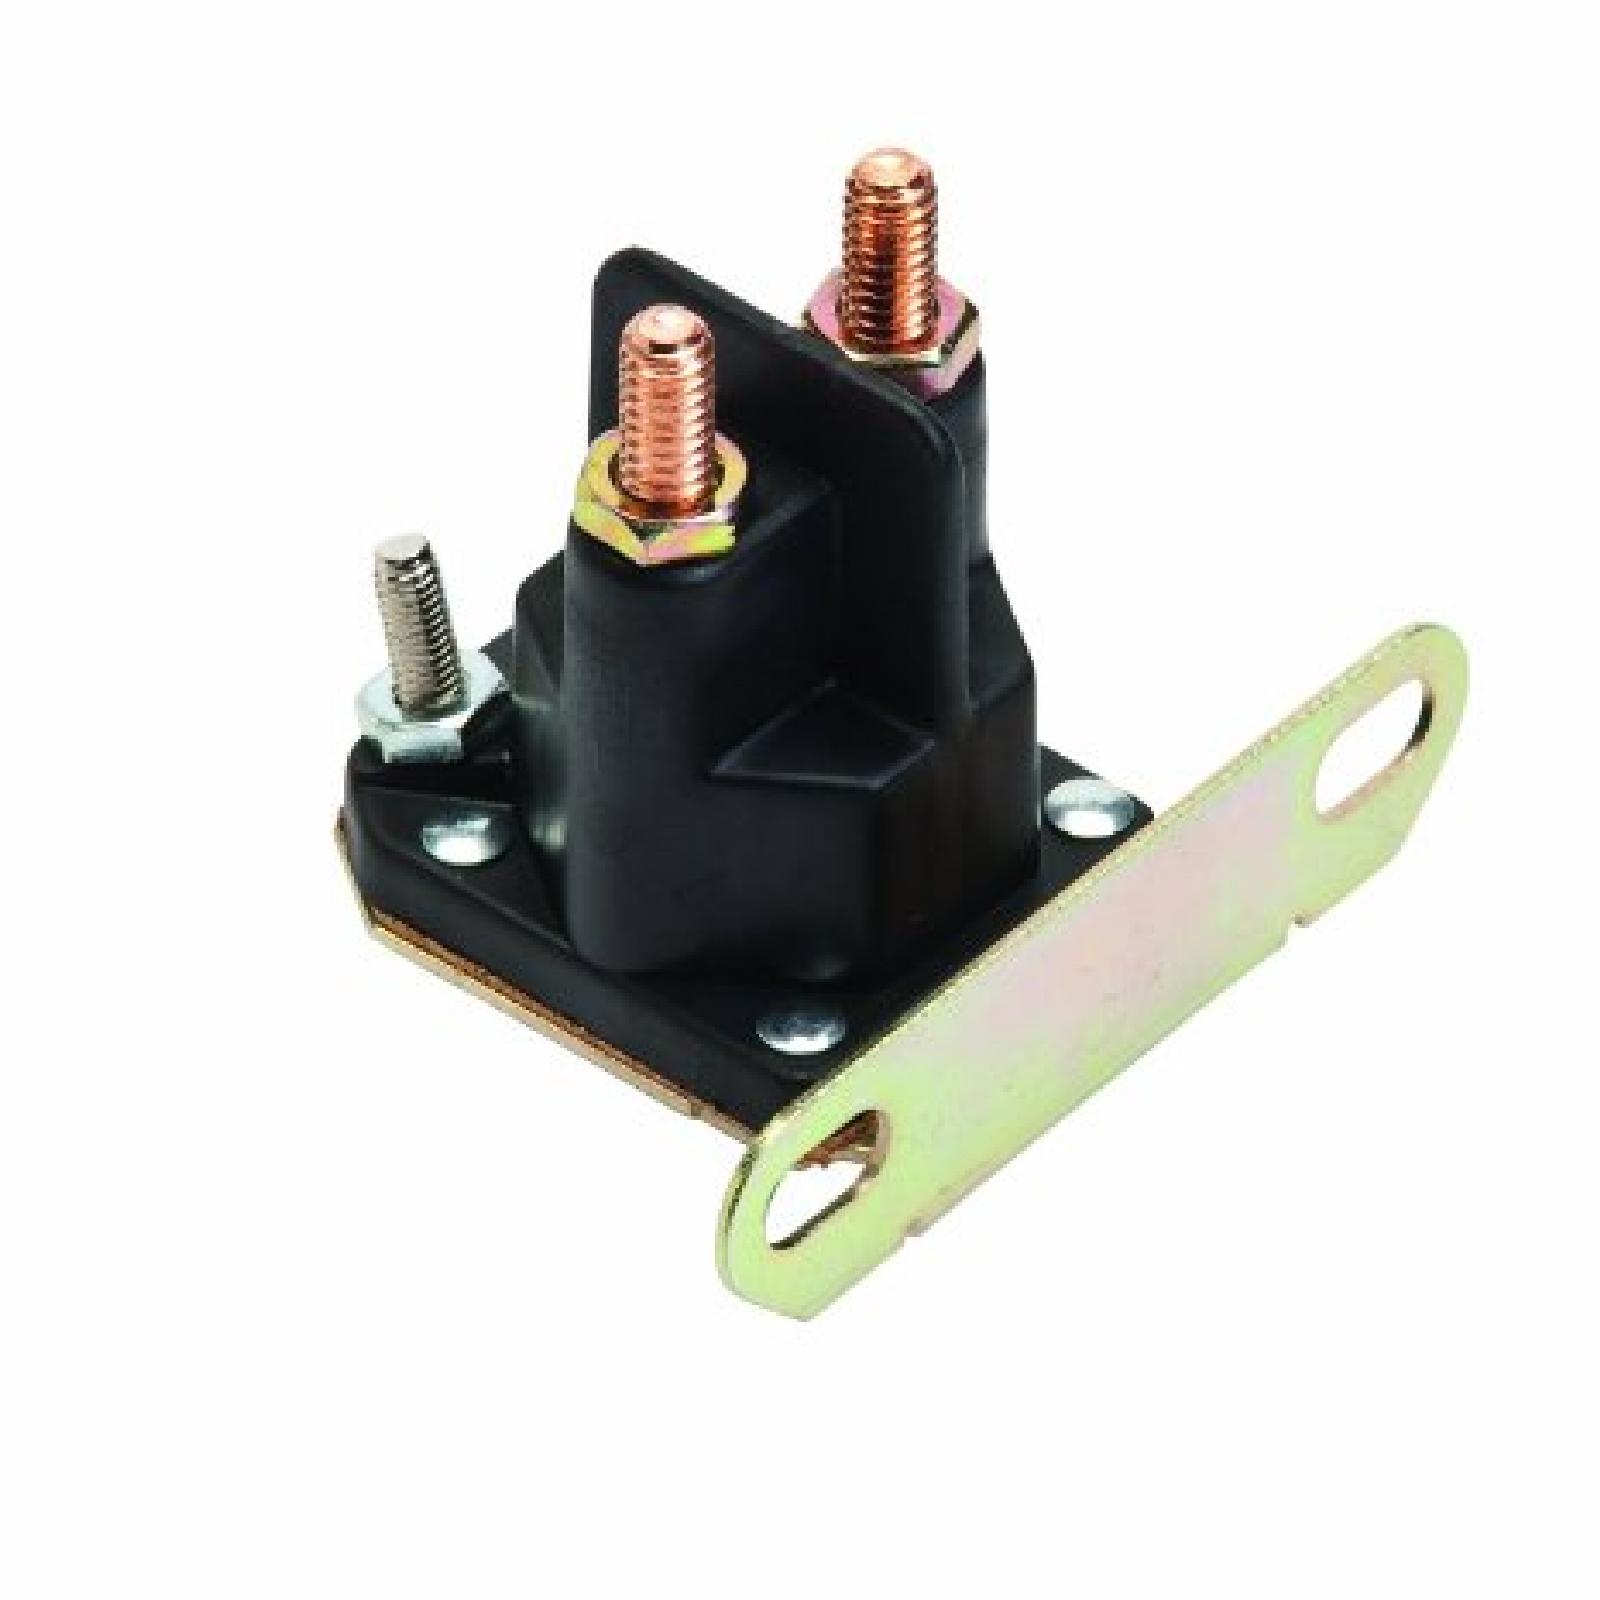 SOLENOID, MTD 3 POST 1/4 part# 33-337 by Oregon - Click Image to Close